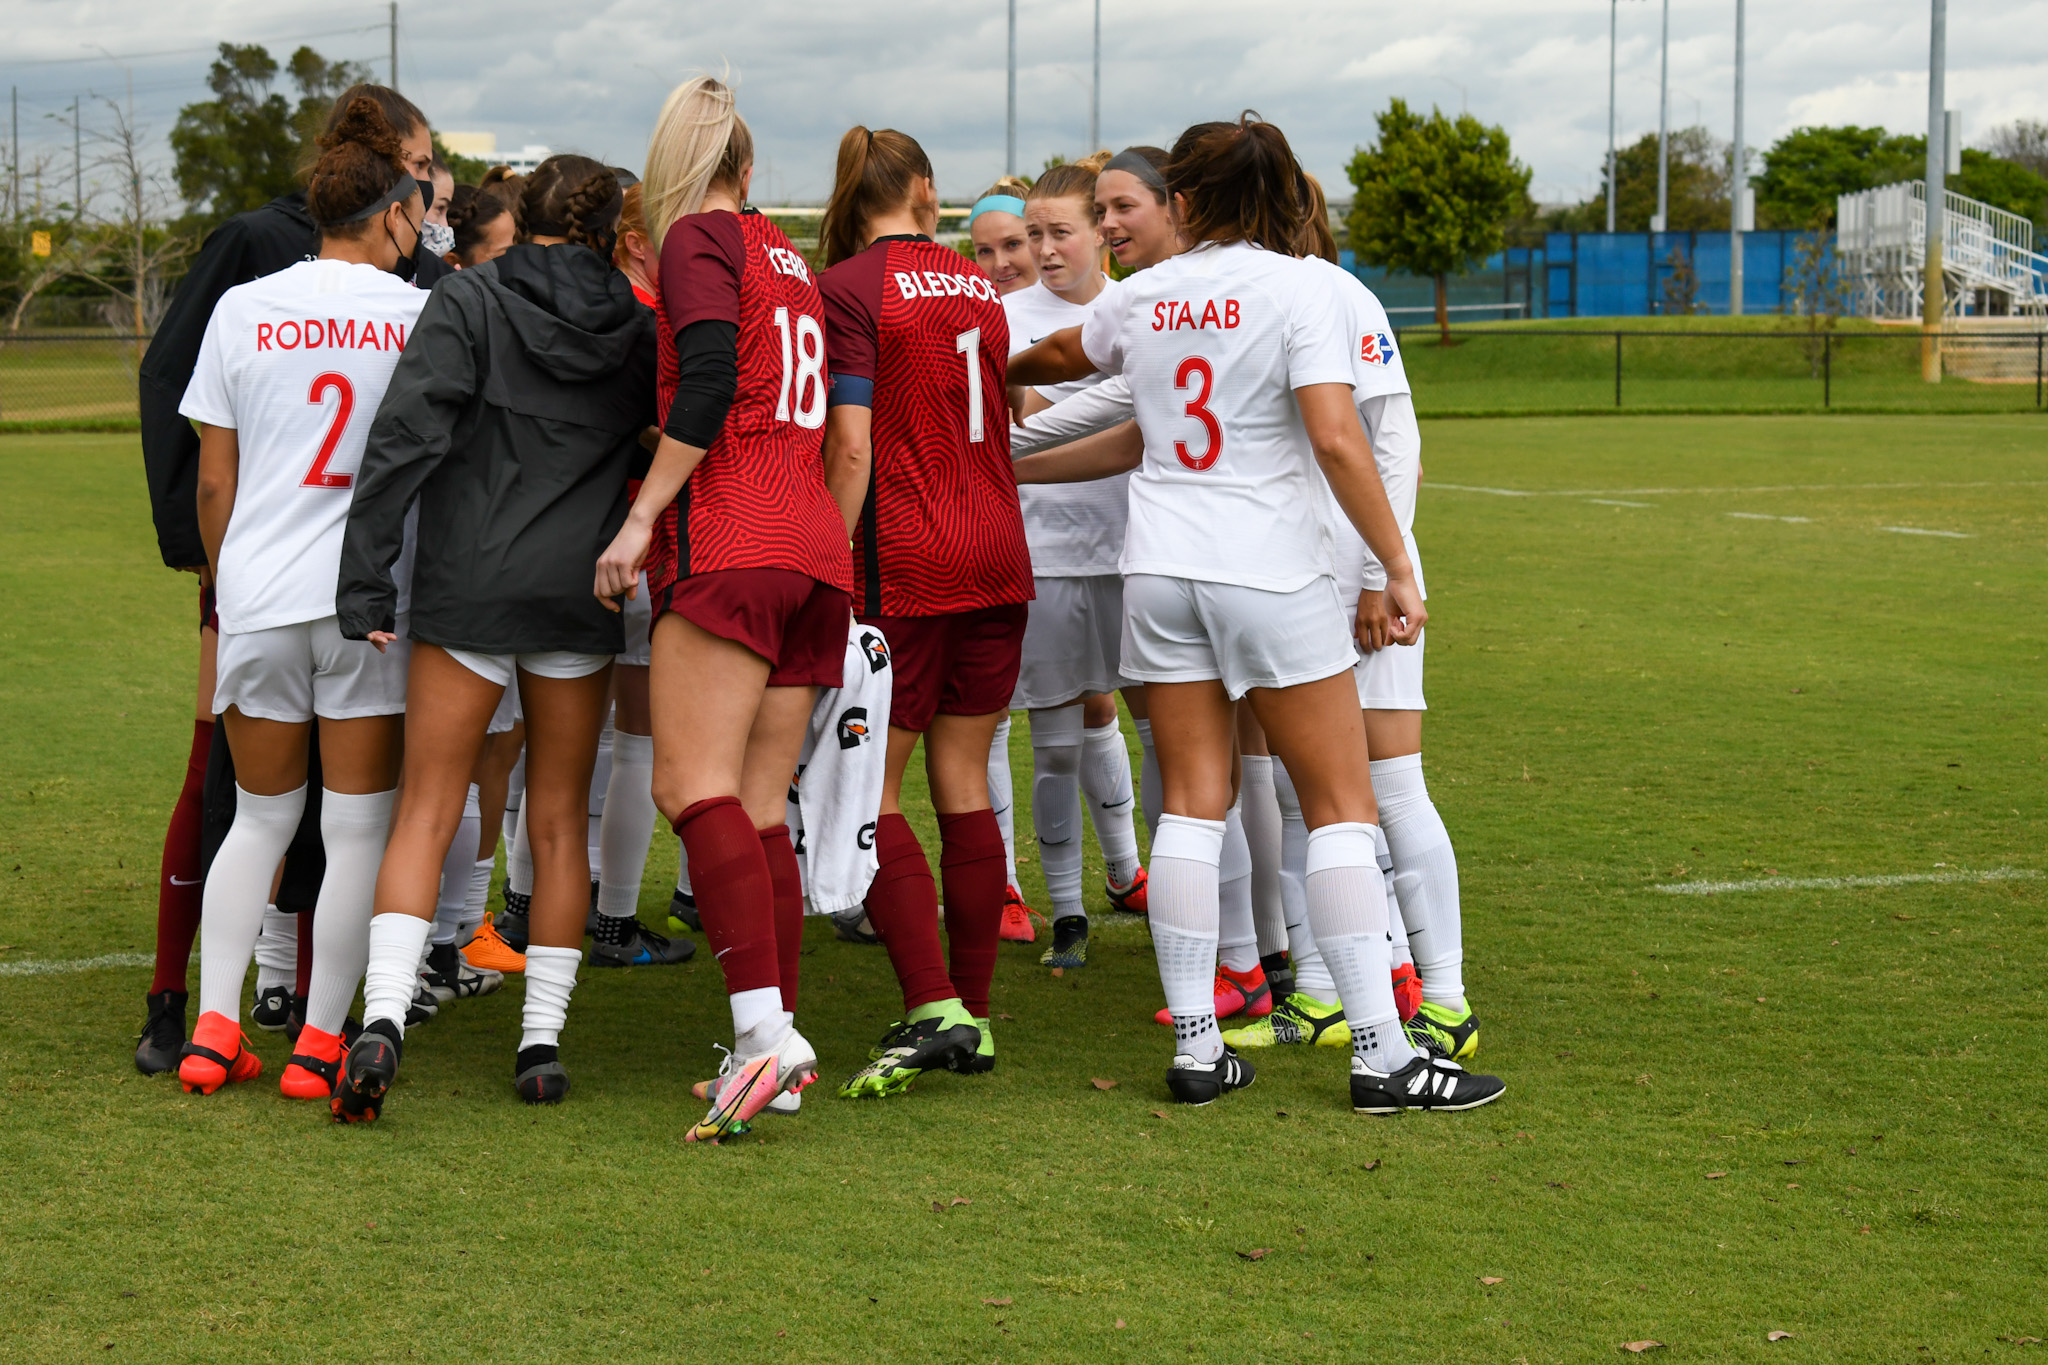 Washington Spirit Open Preseason With 6-0 Victory Over Palm Beach Atlantic University Presented by the WAGS Tournament Featured Image